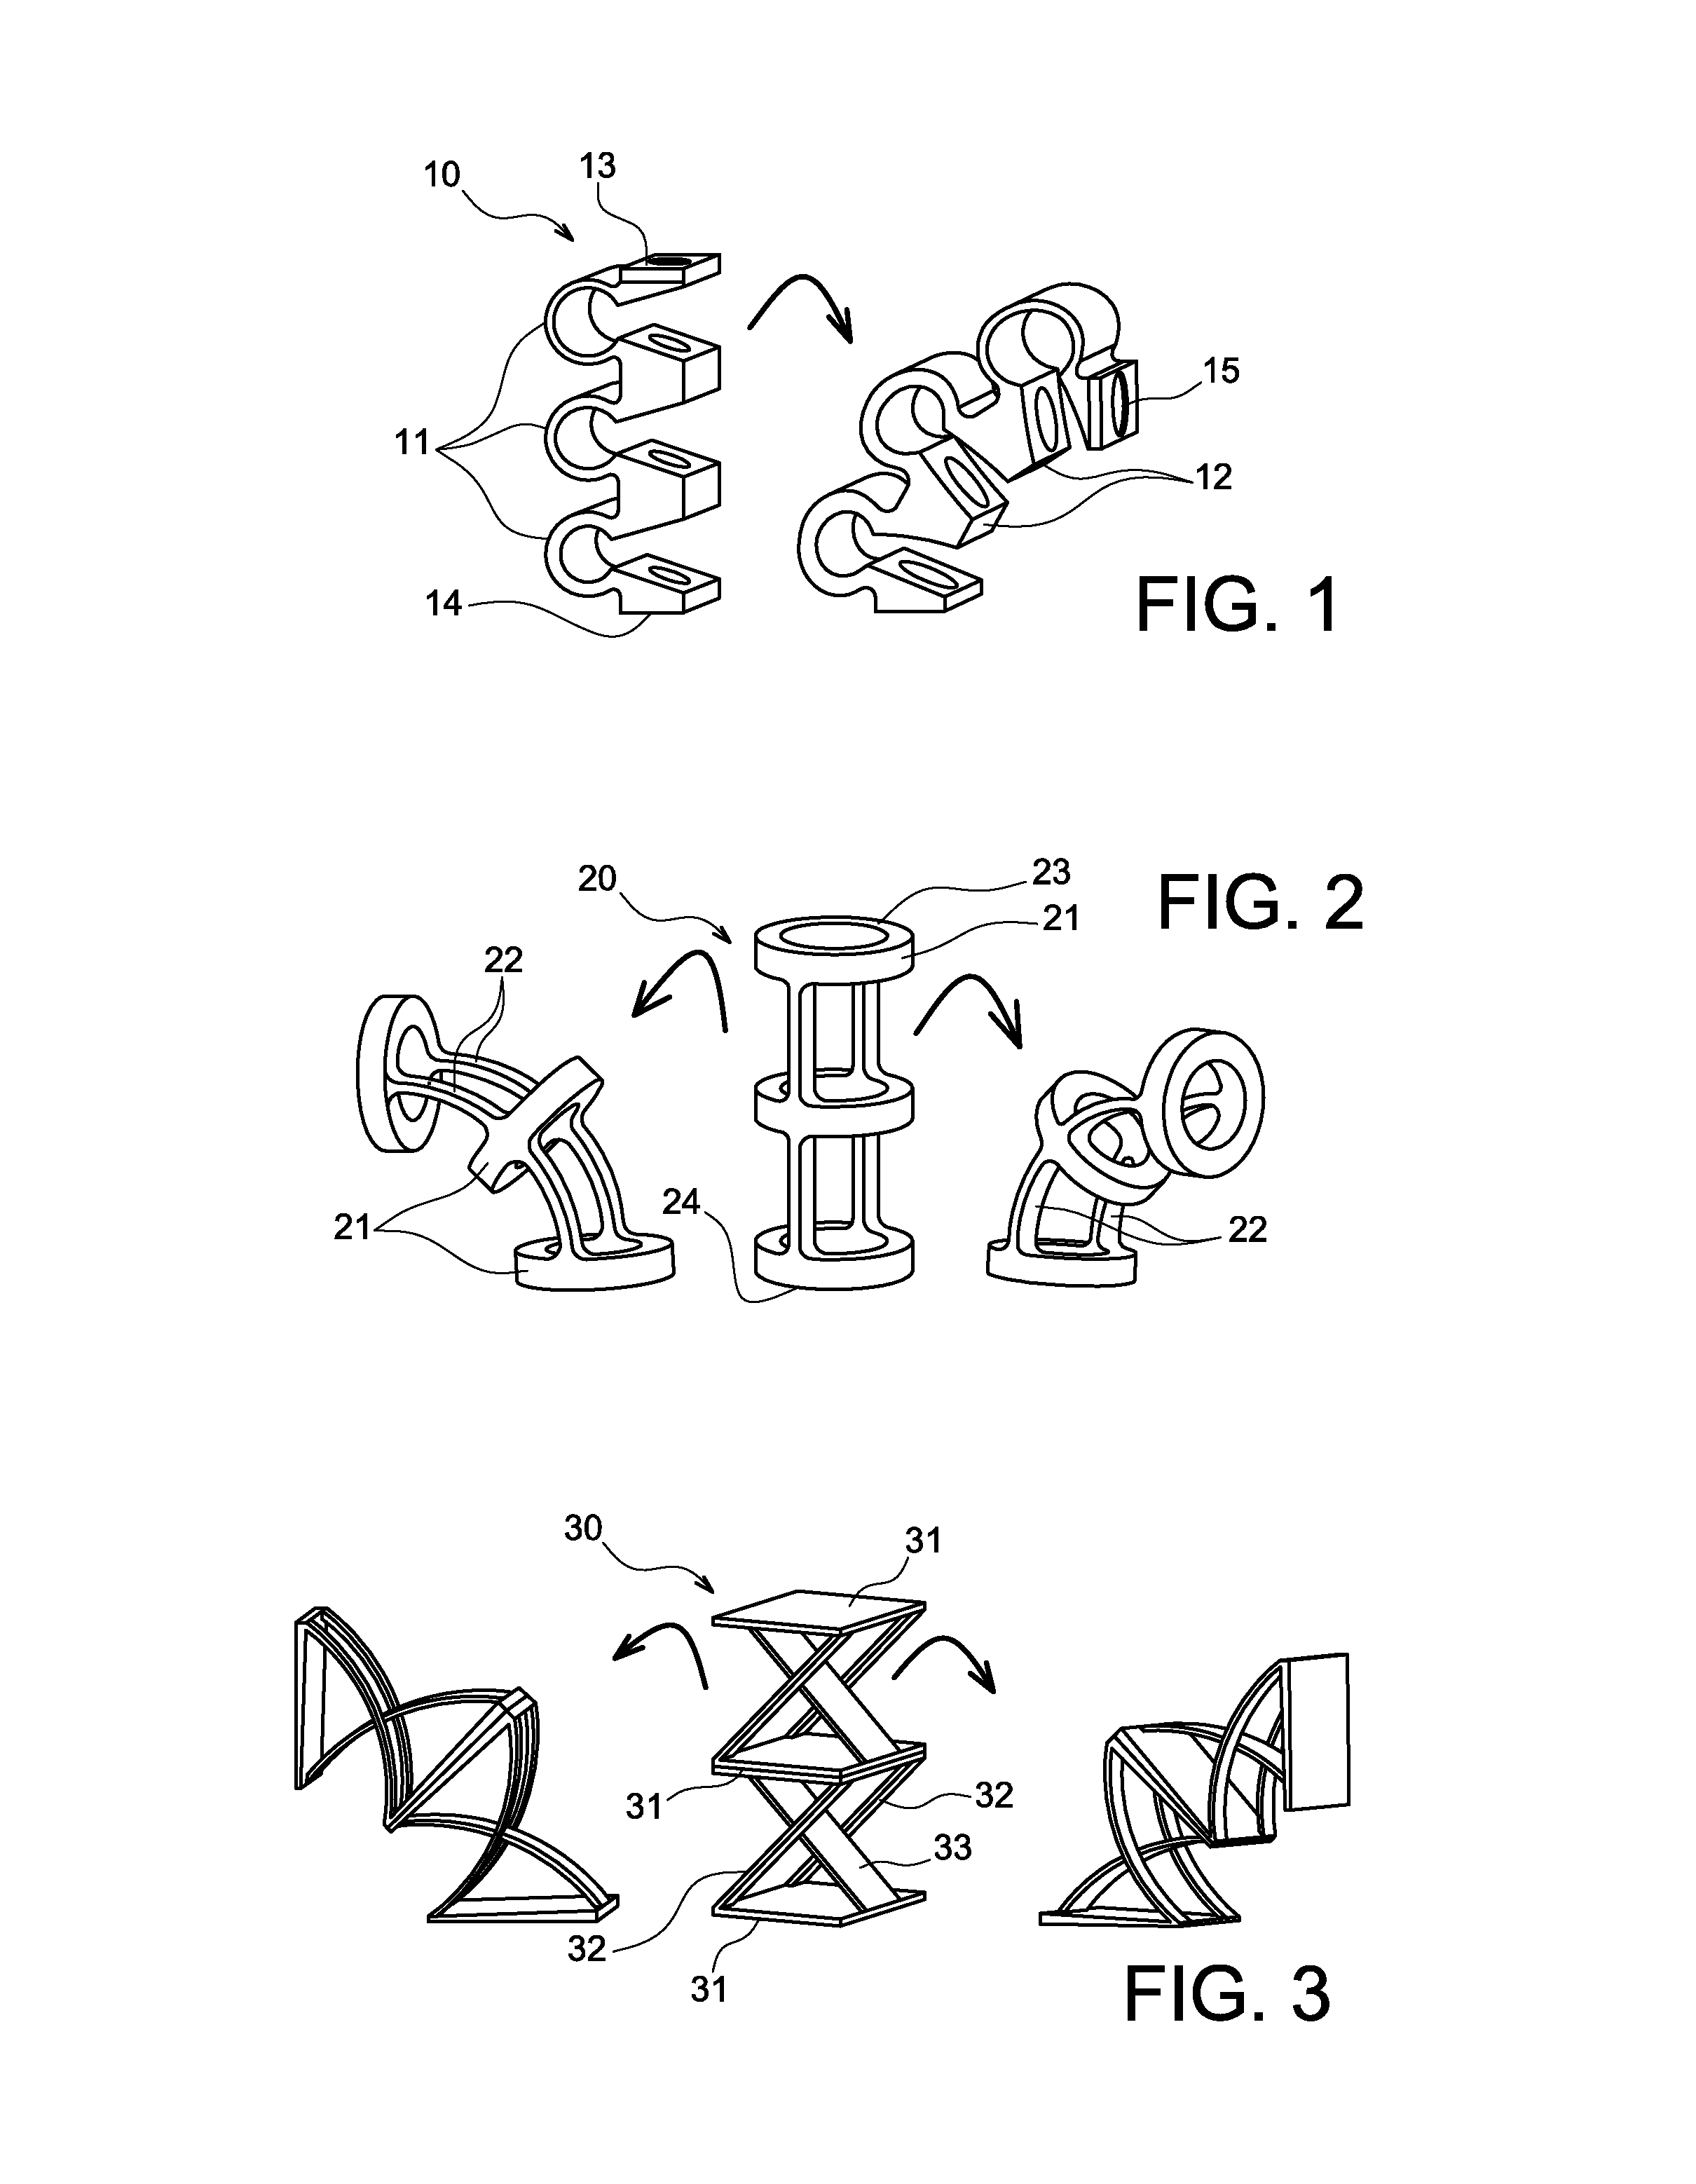 Integrated mecatronic structure for portable manipulator assembly